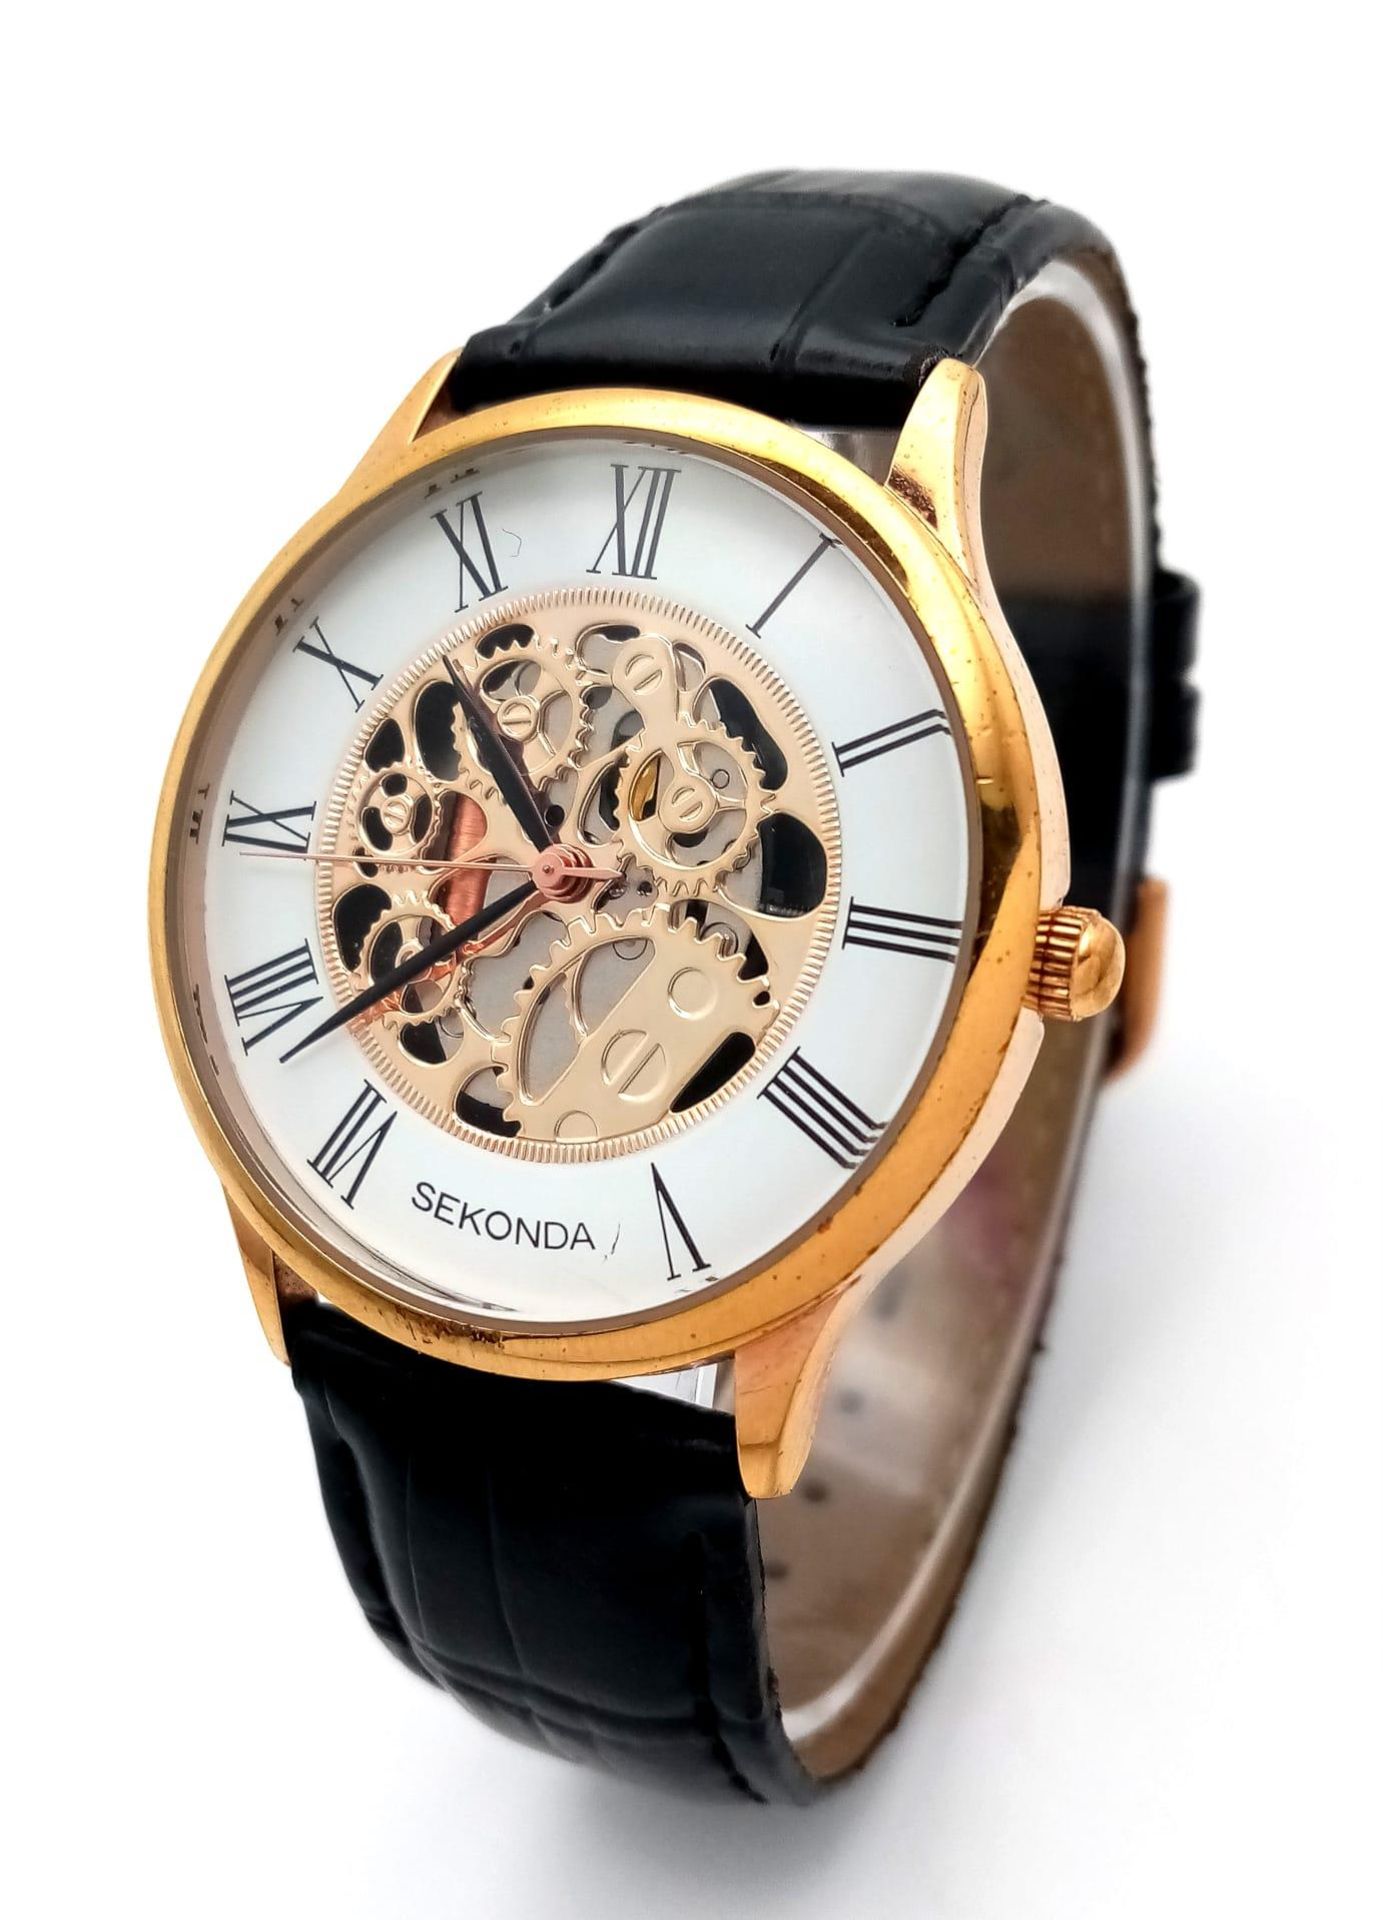 A Sekonda Automatic Skeleton Gents Watch. Black leather strap. Gilded case - 37mm. Skeleton dial. In